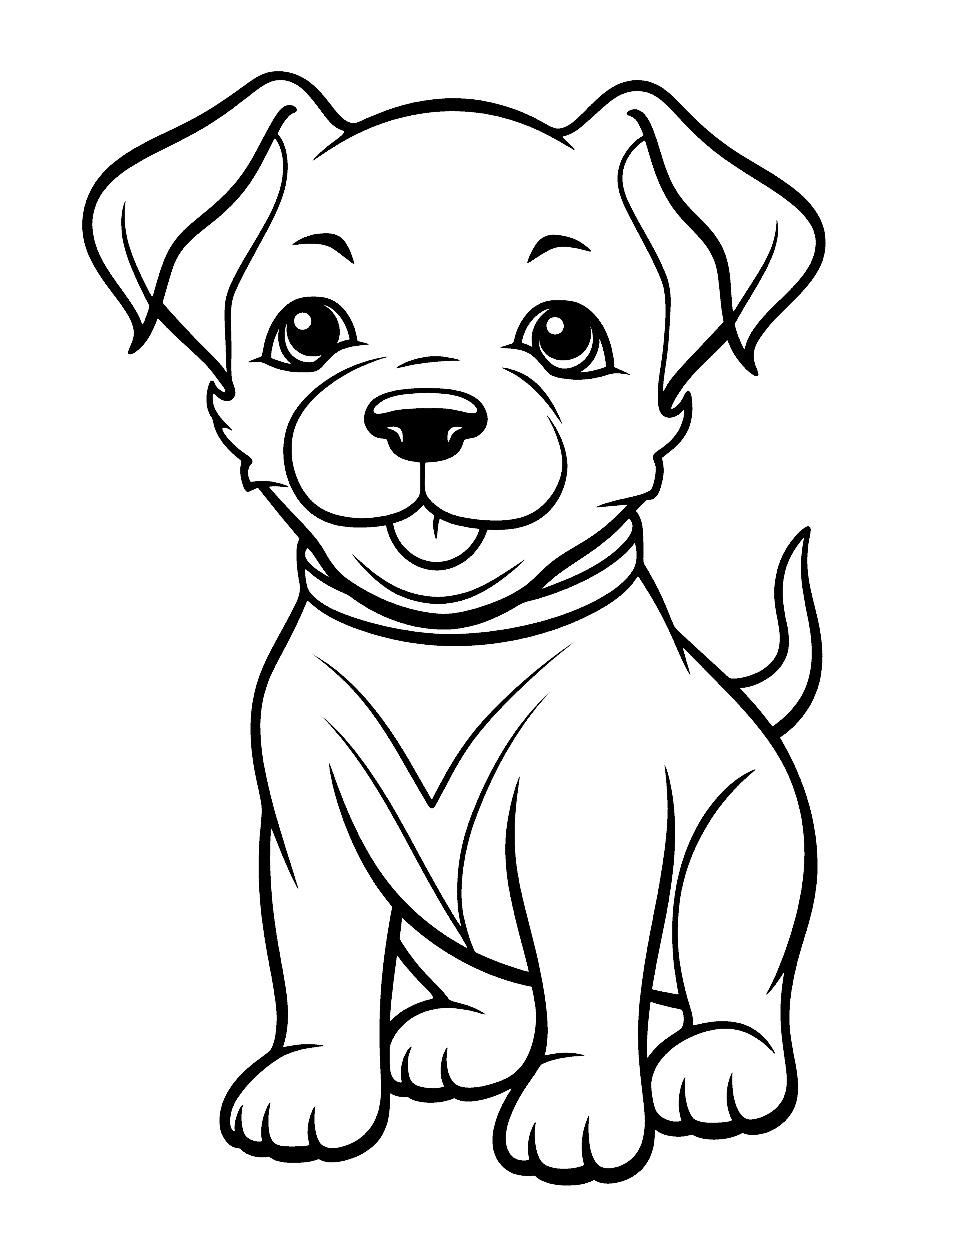 Kawaii Style Cute Pitbull Puppy Coloring Page - A Pitbull puppy drawn in Kawaii style, with its tongue sticking out and a wagging tail.